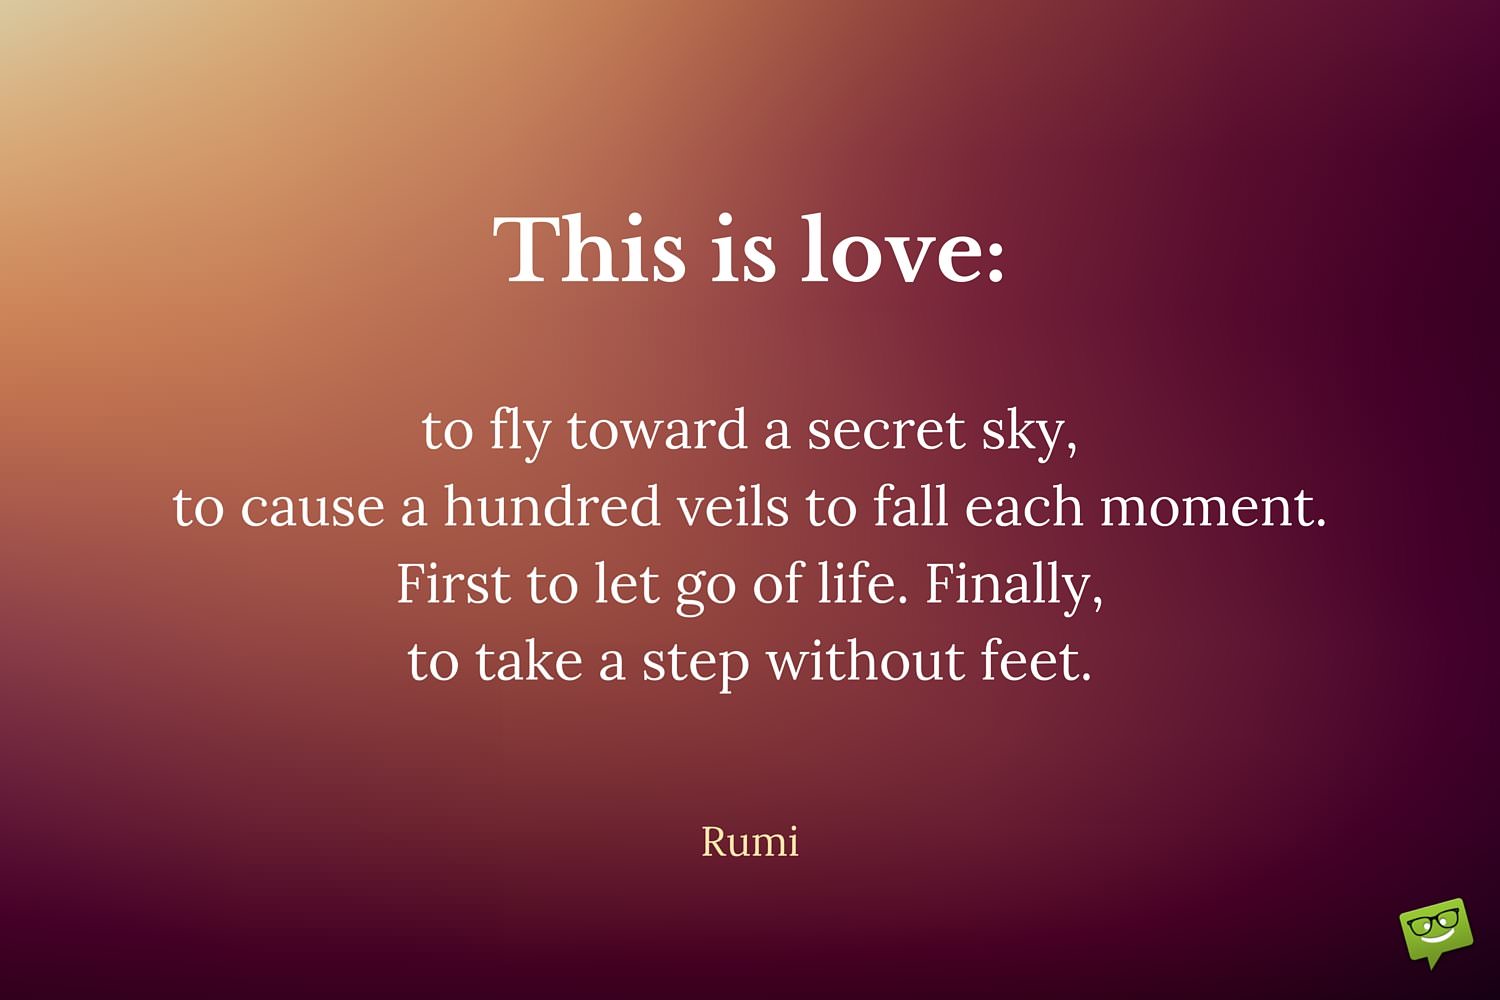 Rumi on Love! Read his Best Quotes on What Makes Us One